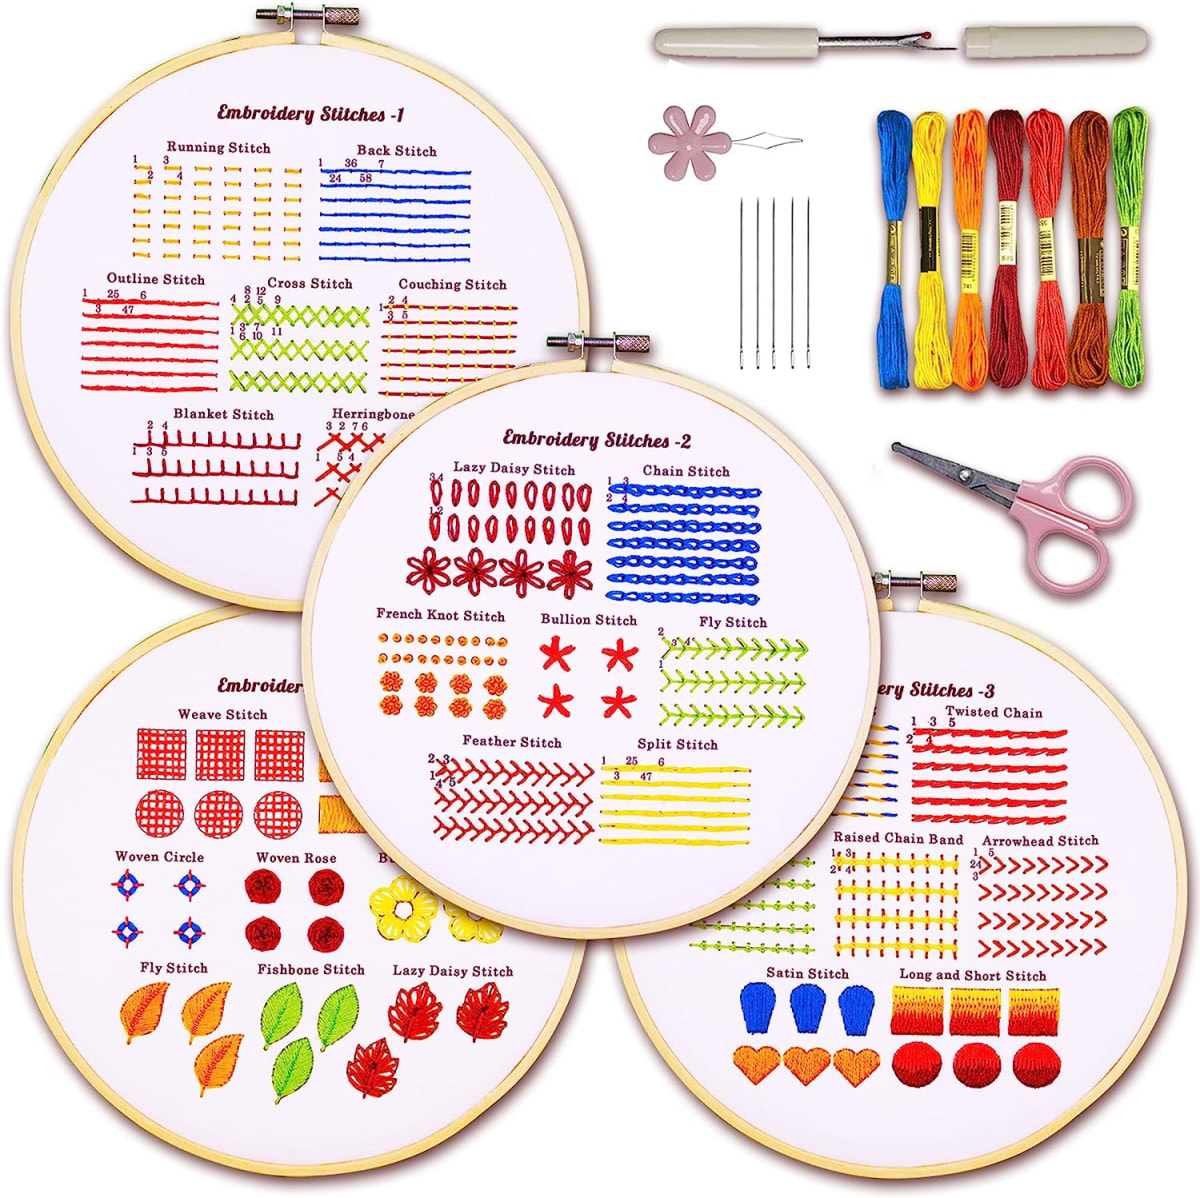 Embroidery Stitches Practice Kit